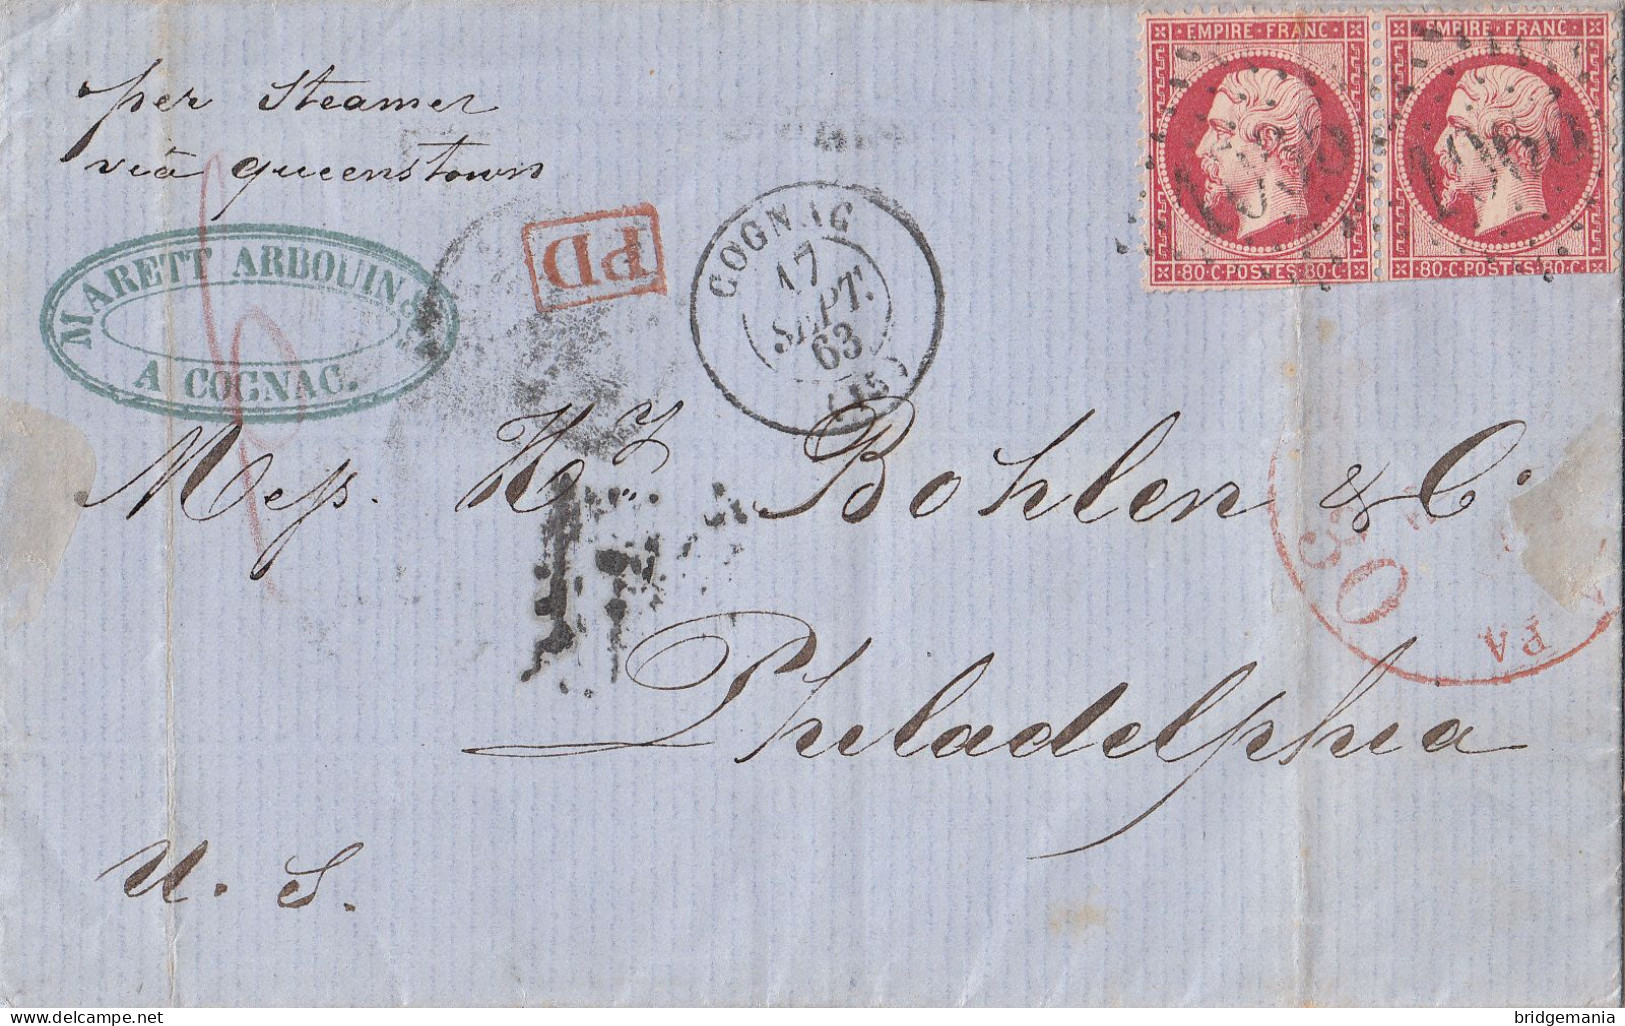 MTM136 - 1863 TRANSATLANTIC LETTER FRANCE TO USA Steamer EUROPA CUNARD - PAID - 2 RATE - Marcophilie